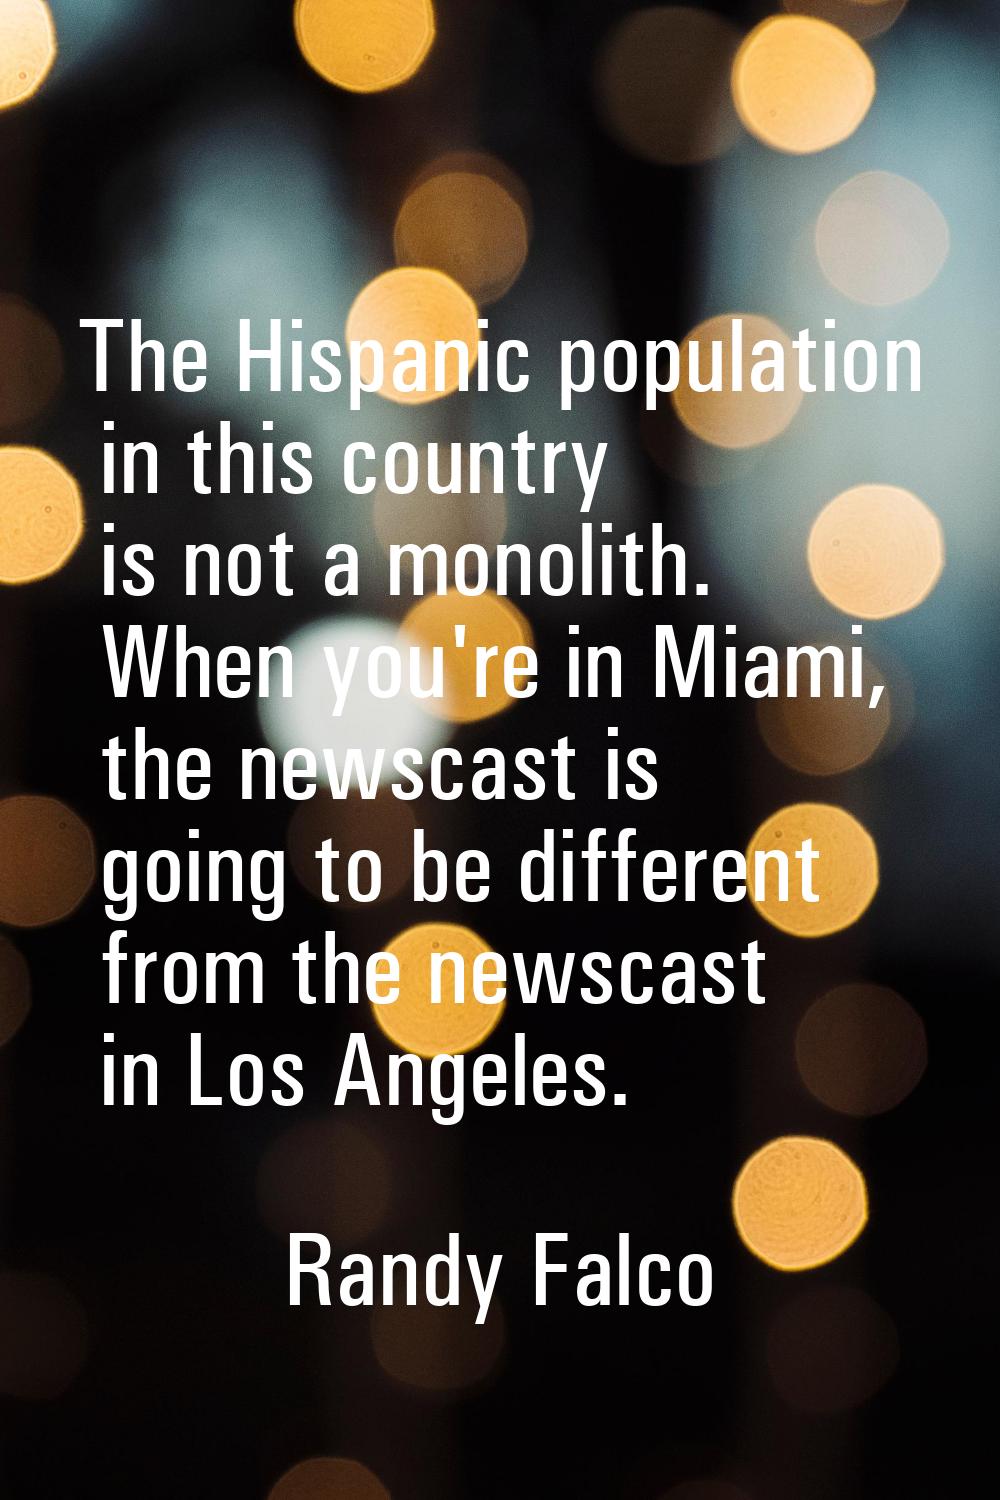 The Hispanic population in this country is not a monolith. When you're in Miami, the newscast is go